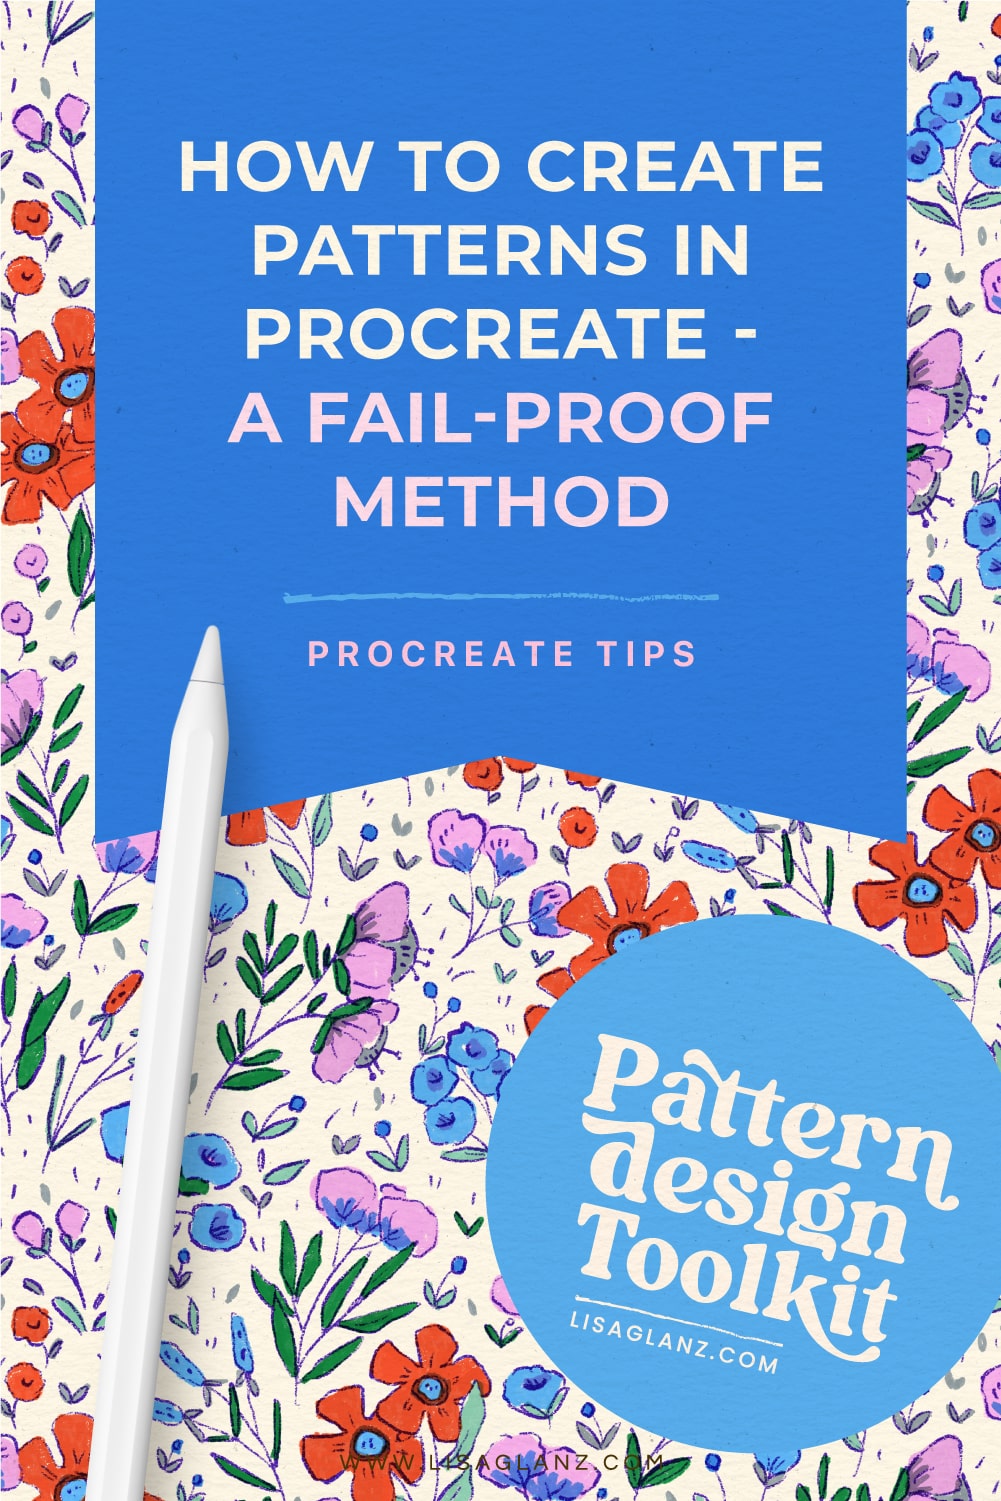 How to create patterns in Procreate – A fail-proof method!